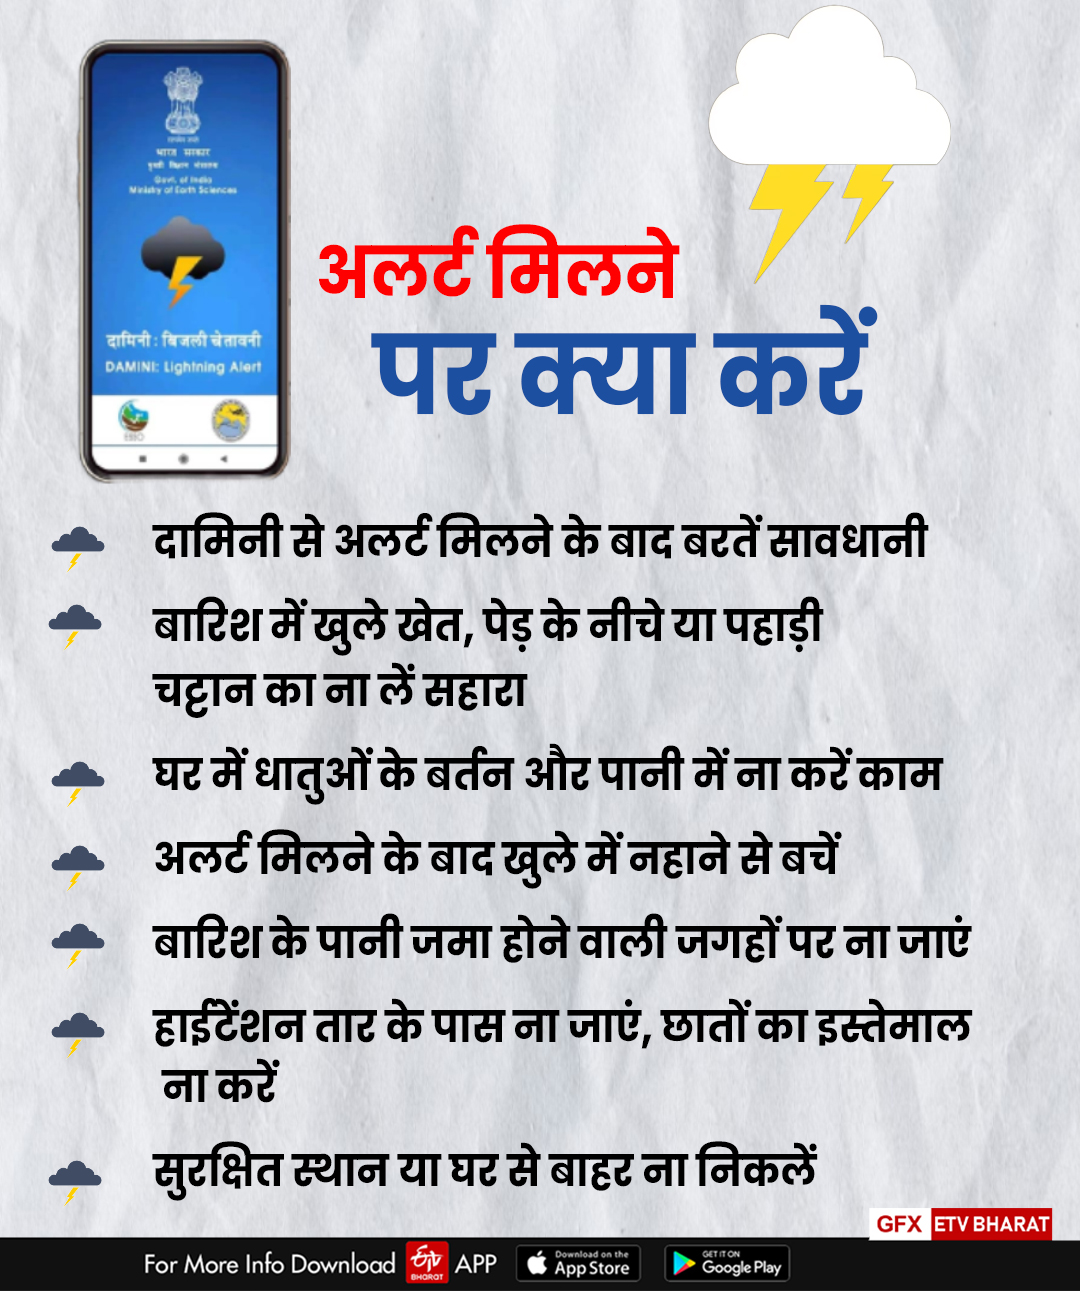 What to do when you get alerts from Damini app